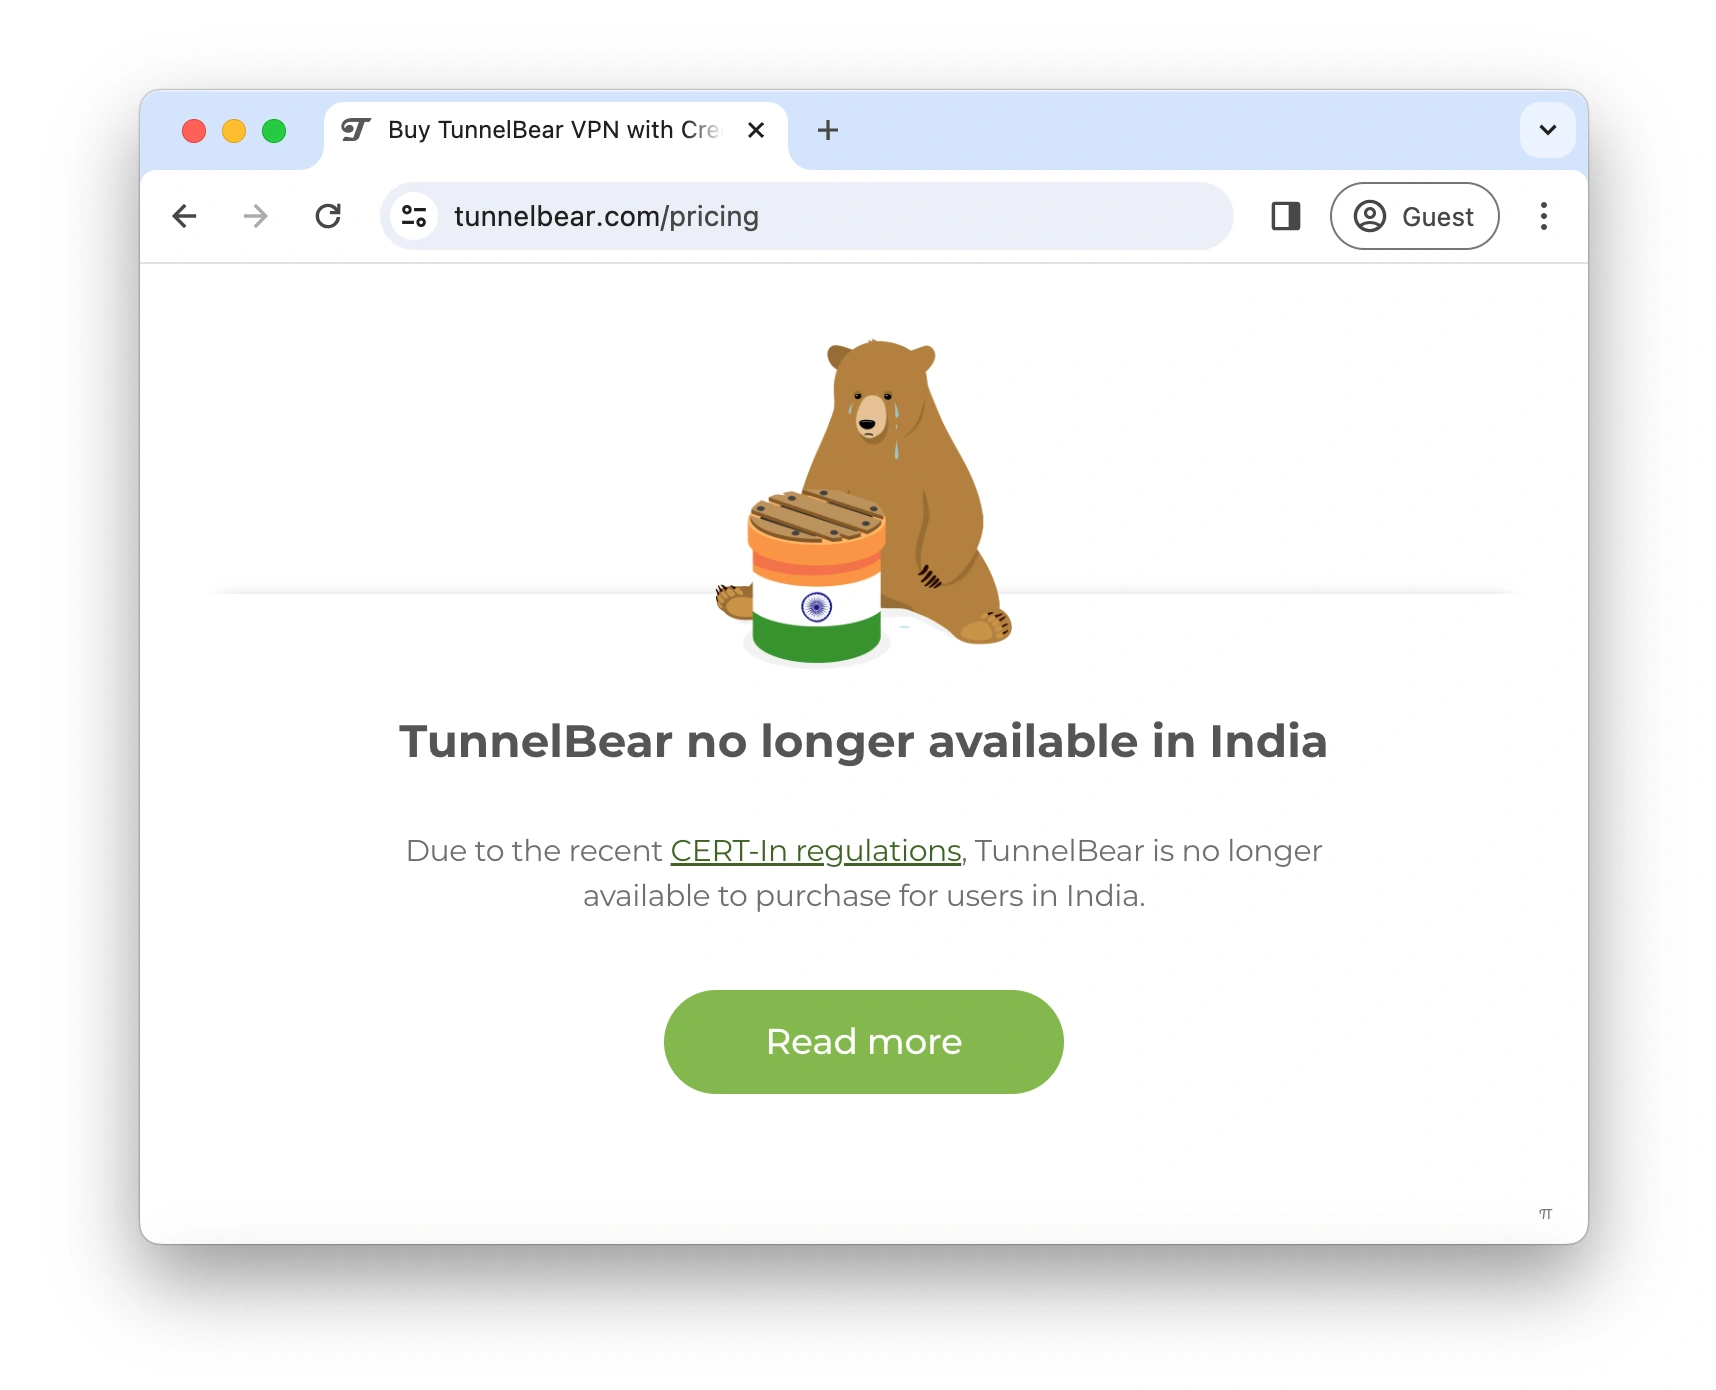 Error message outlining TunnelBear's unavailability in India